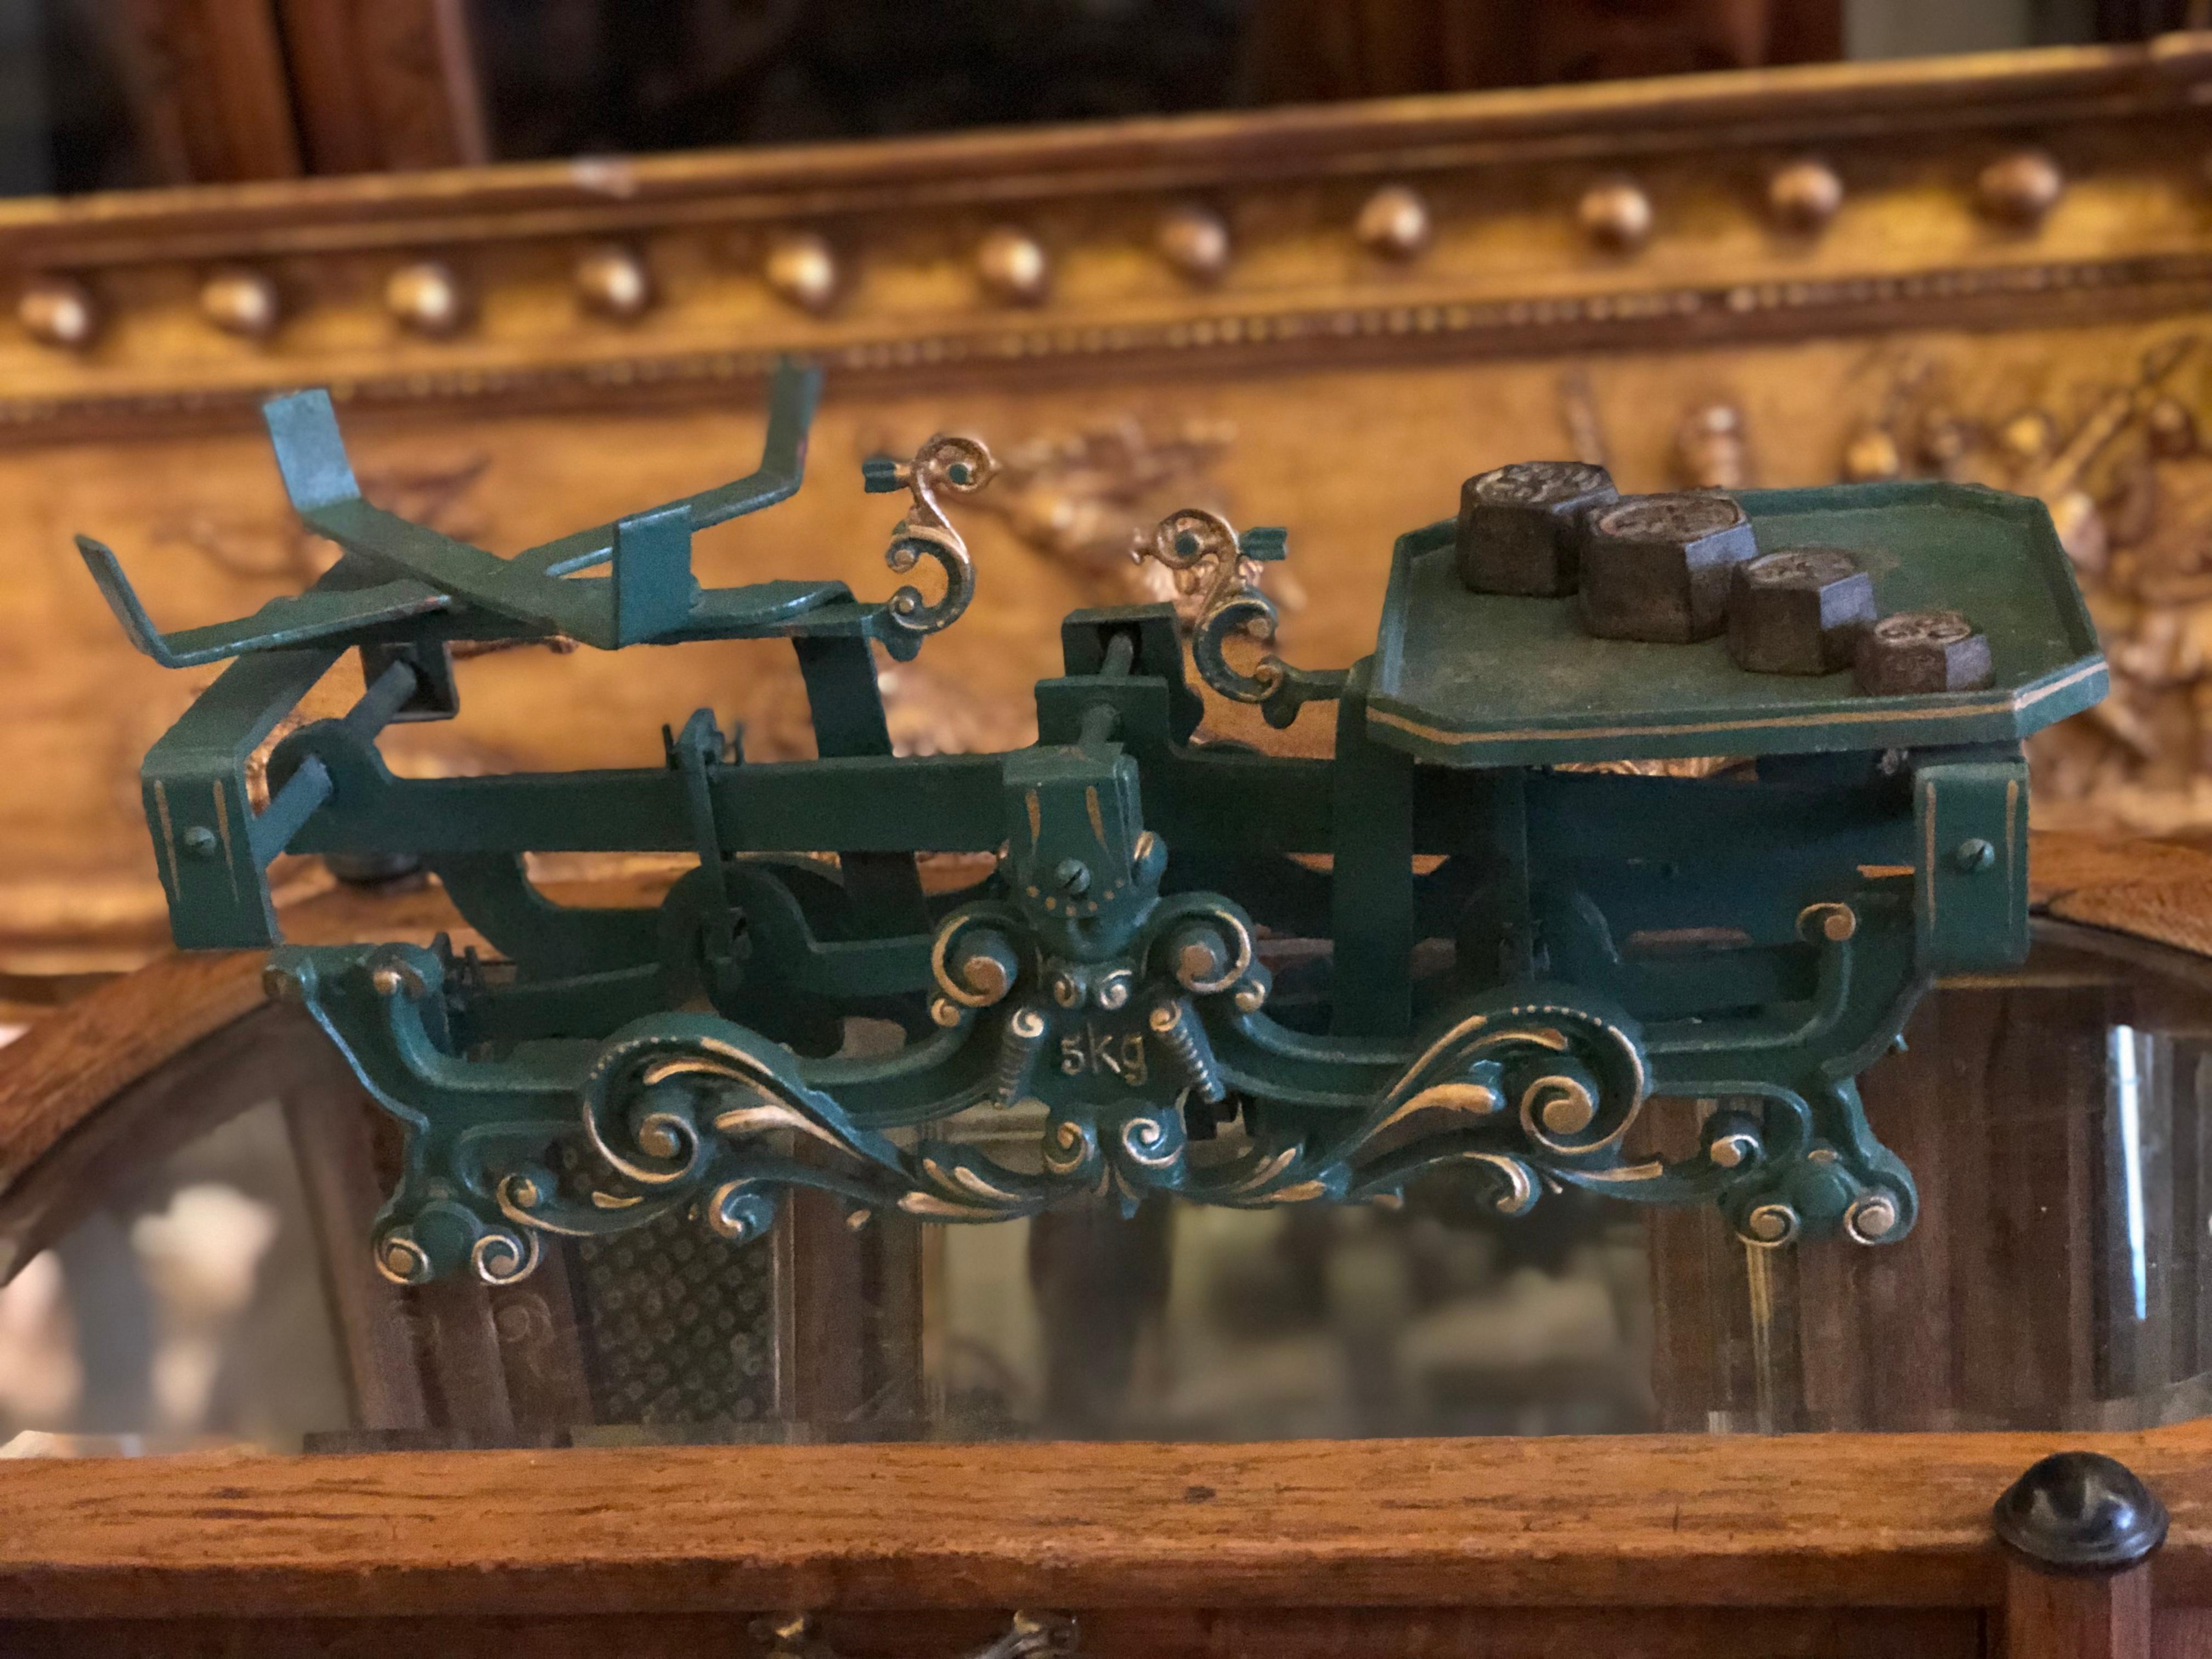 Swiss balance iron scale hand painted in green with floral ornaments decorated in gold.
It is made circa 1920 and is in very nice condition.